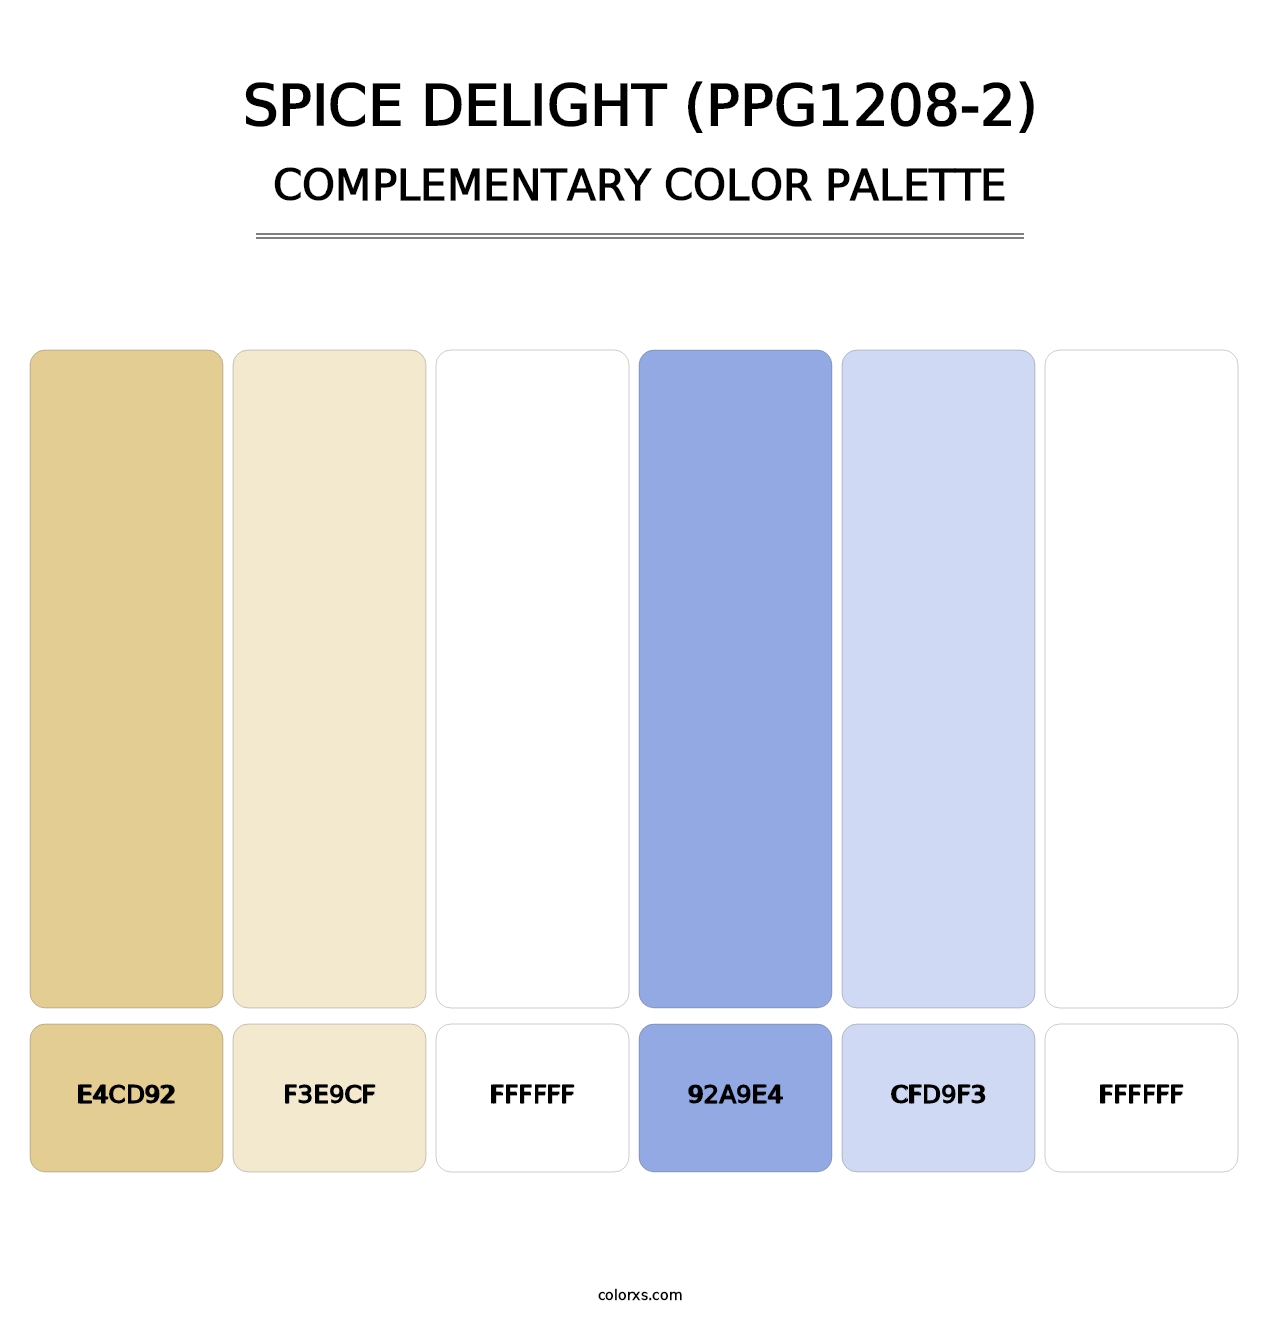 Spice Delight (PPG1208-2) - Complementary Color Palette